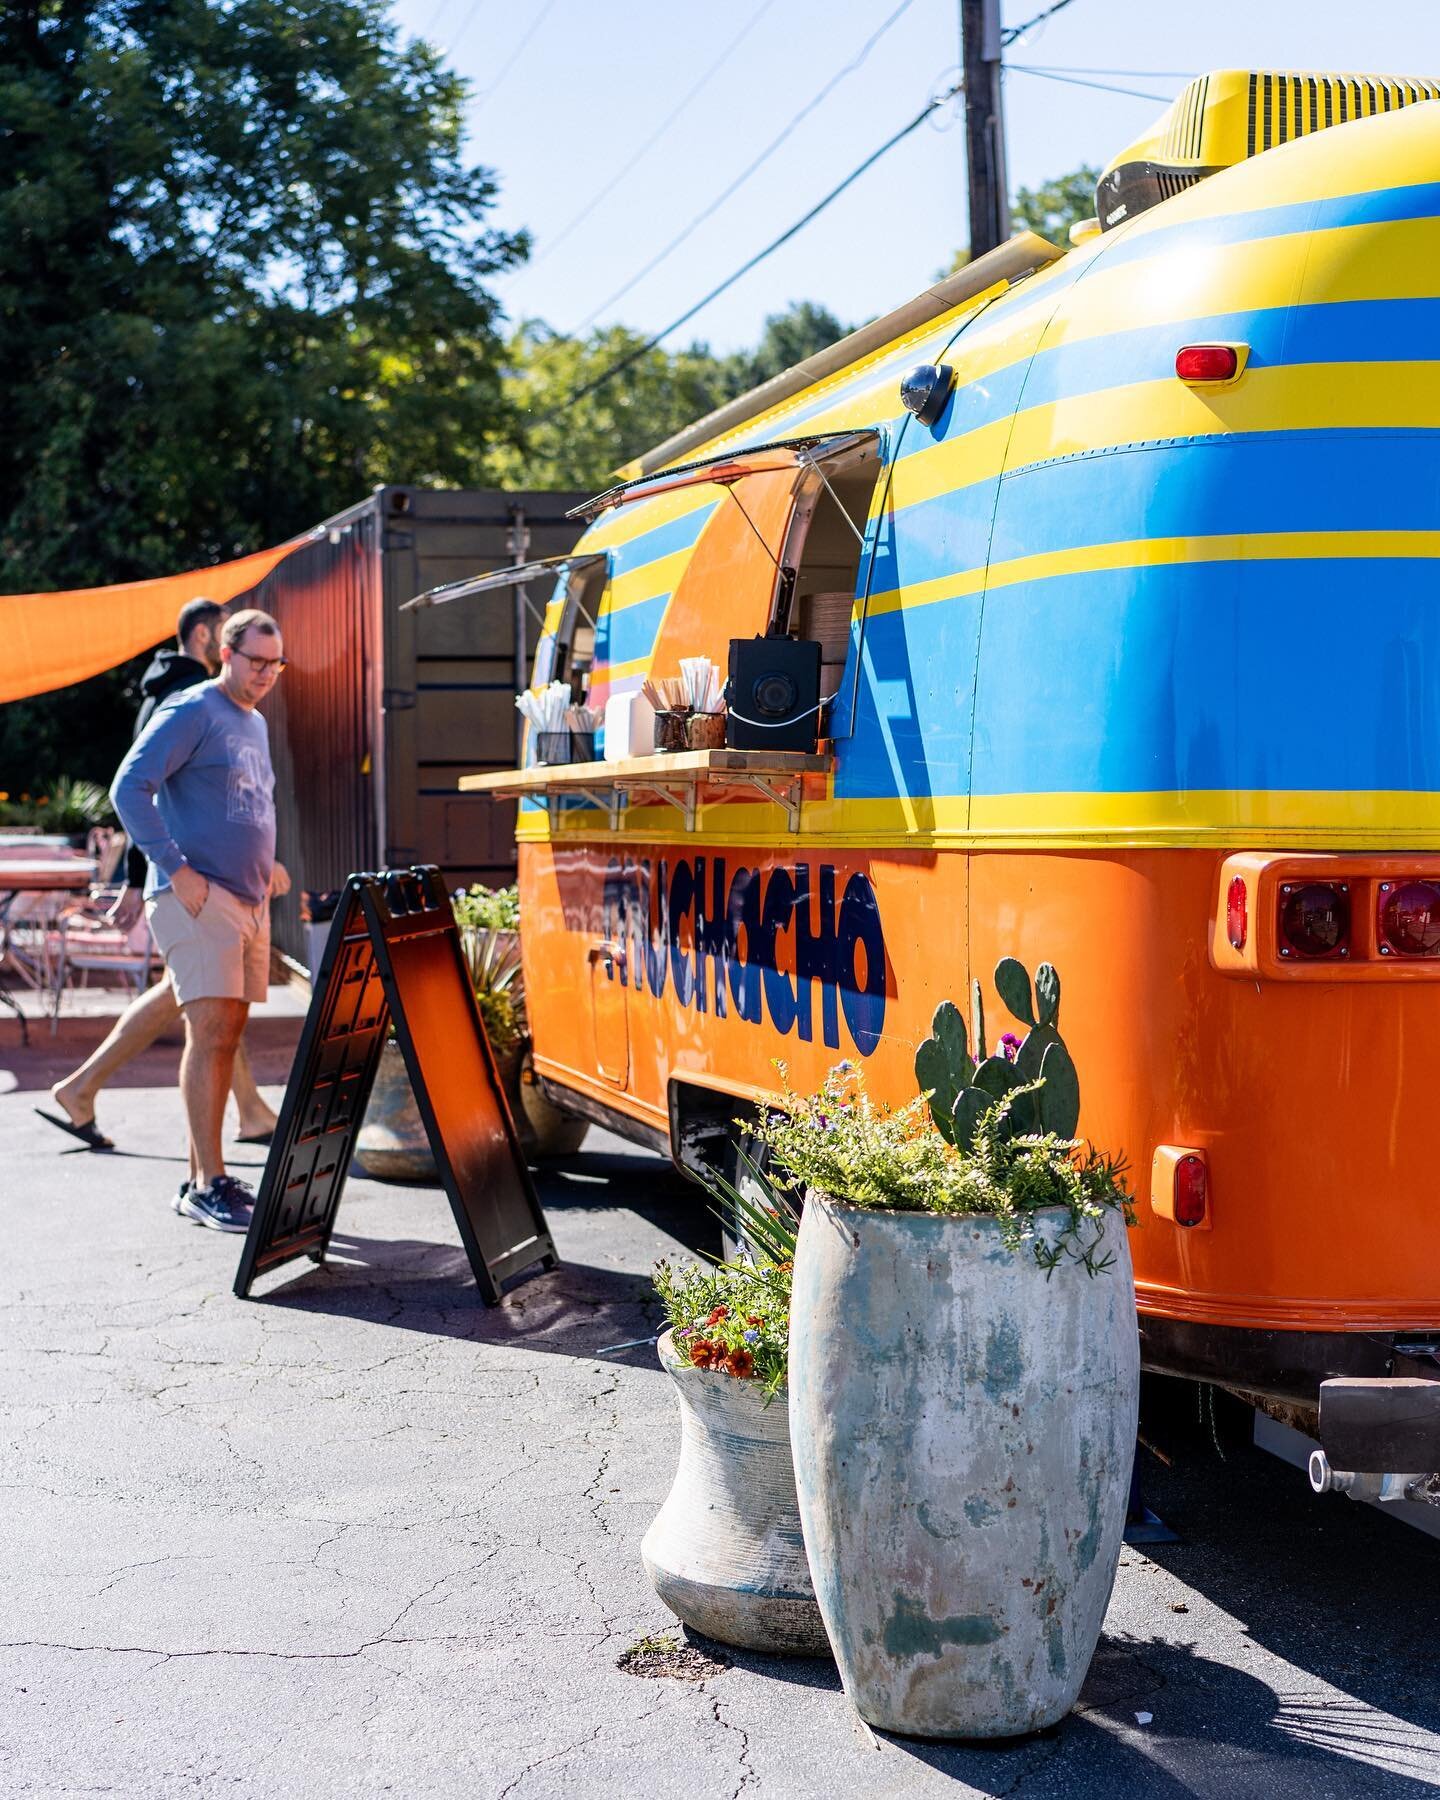 Mahalo, ATL friends!  A few months ago we made our maiden voyage with the trusty Burrito Bus on the Westside in the parking lot of a humble former muffler shop.  Since then, we have been flooded with emails and messages from concerned citizens asking